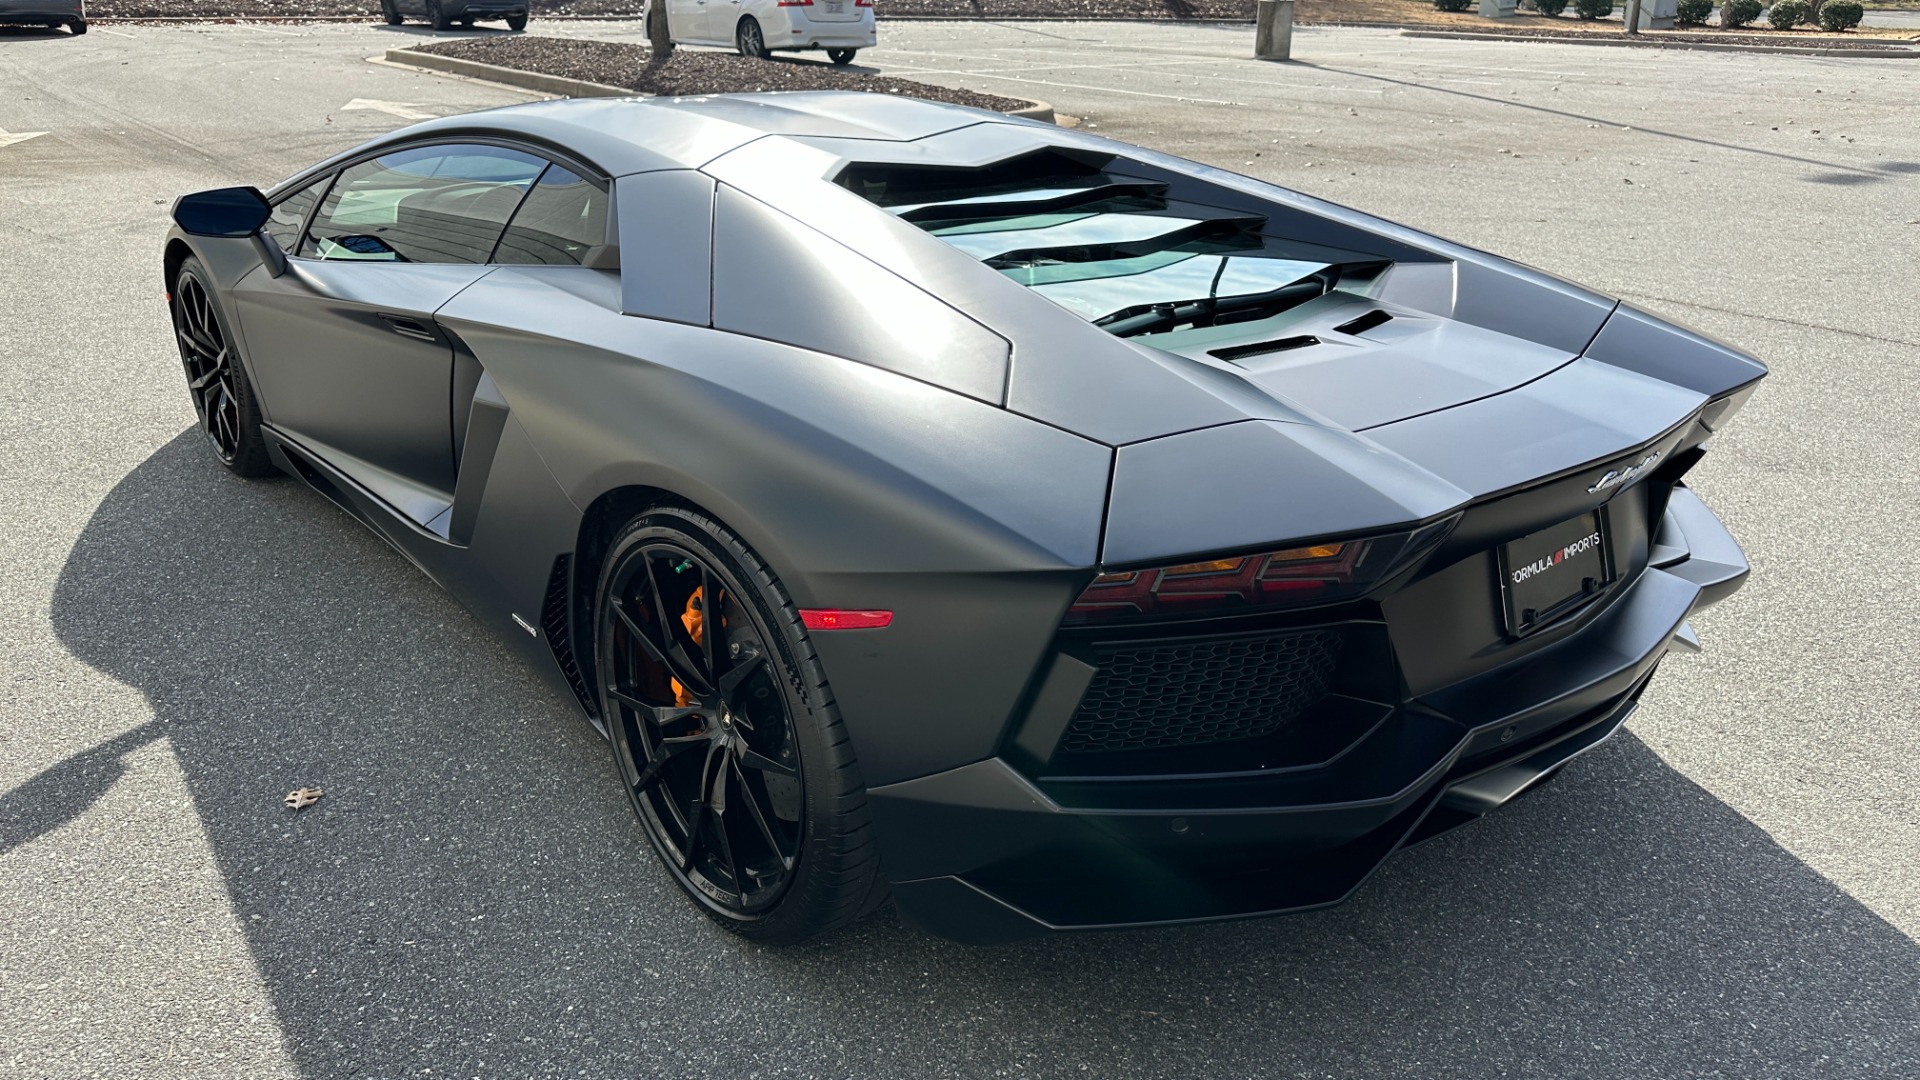 Used 2013 Lamborghini Aventador LP 700-4 / FULL PAINT PROTECTION / MATTE PAINT / FORGED WHEELS / GLASS ENGI for sale $311,000 at Formula Imports in Charlotte NC 28227 5